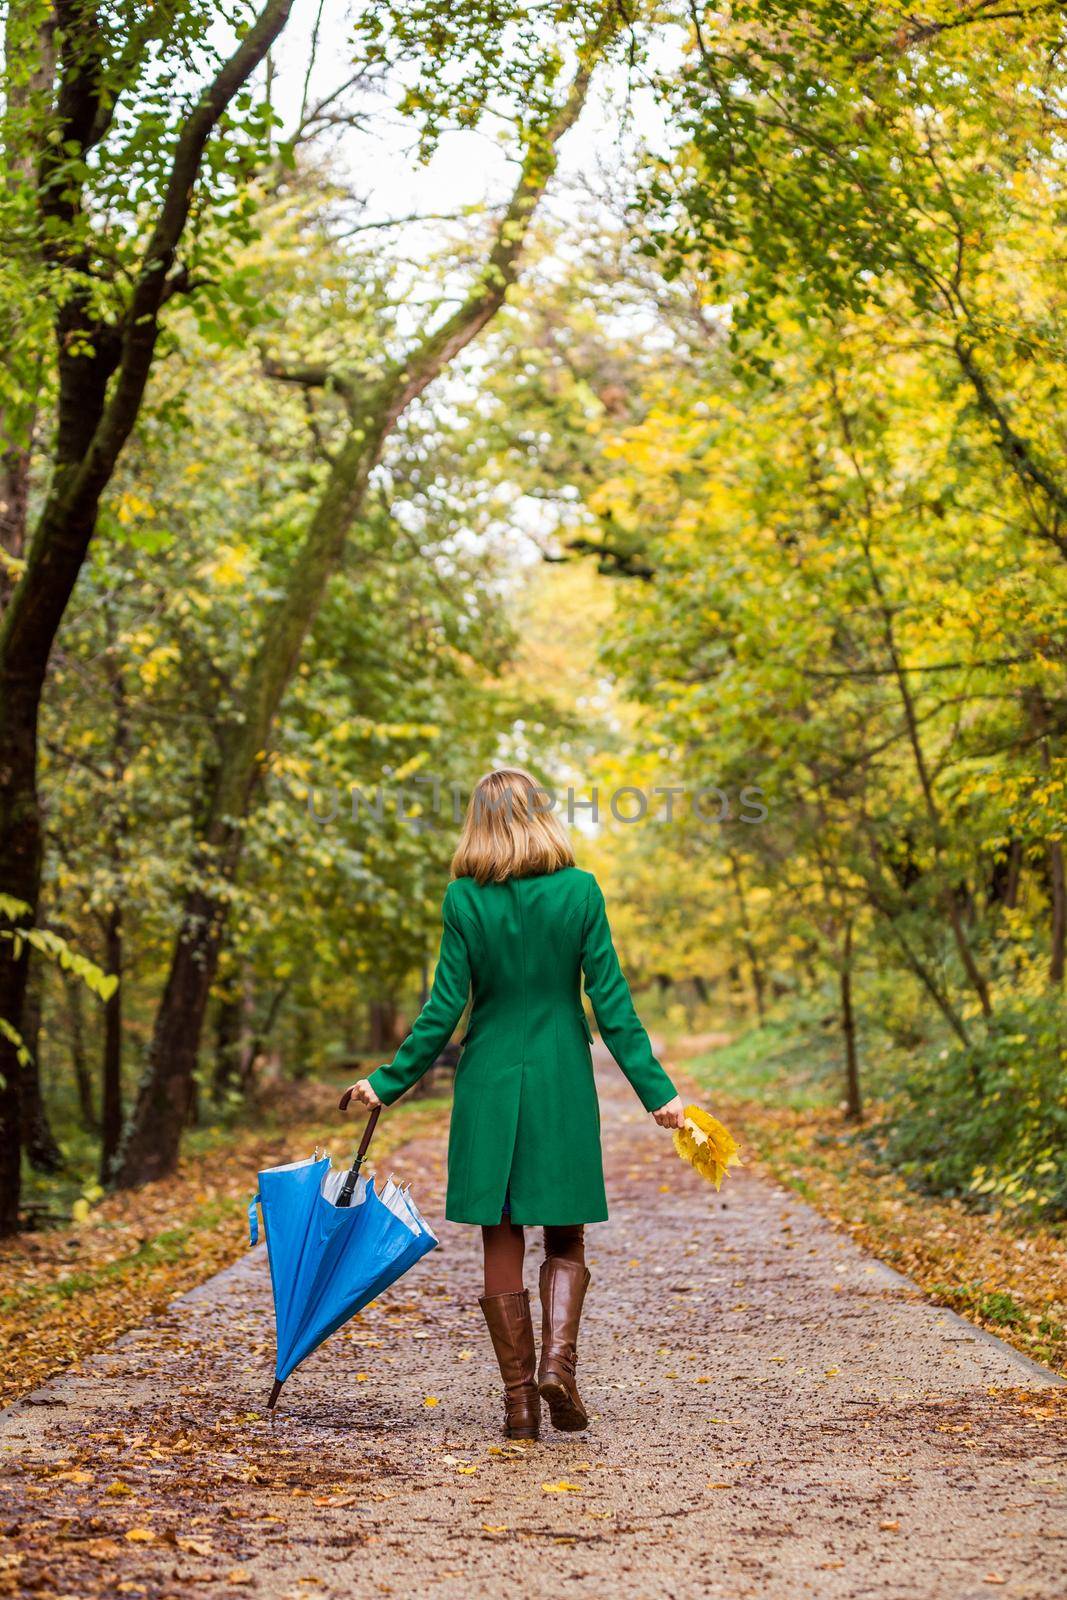 Woman with umbrella and fall leaves  walking in the park by Bazdar